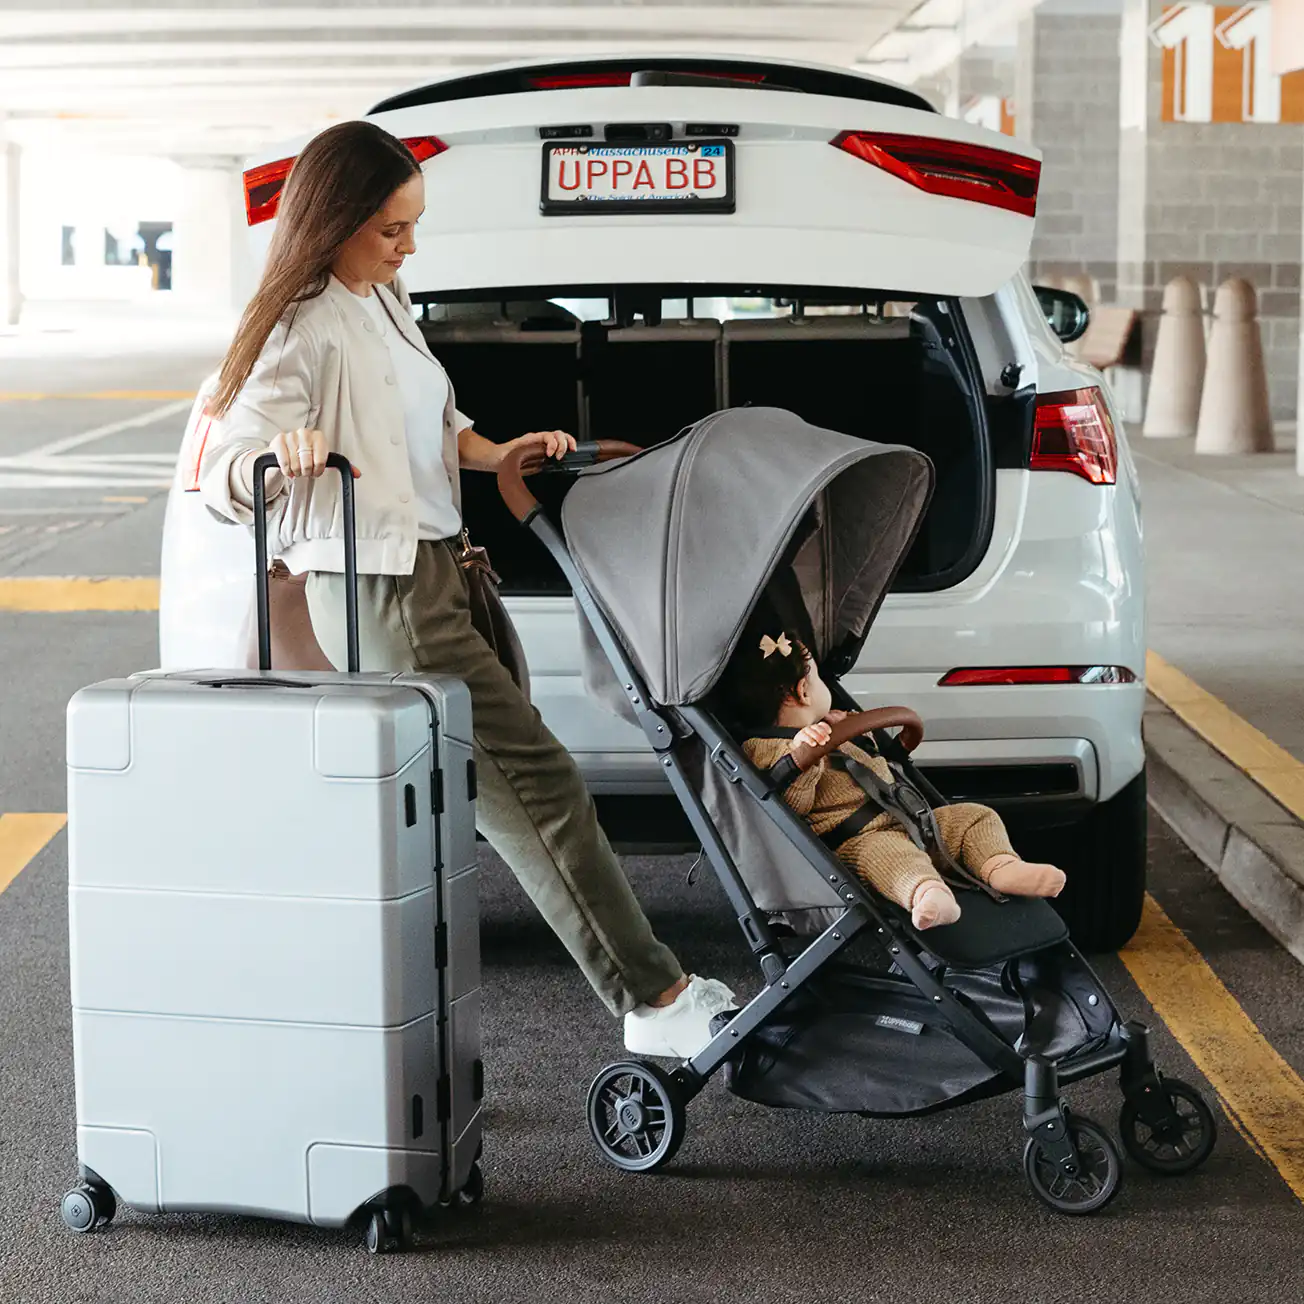 A woman brakes her Minu V2 stroller outside of an airport, ready to load the travel stroller into a car due to its compact one-handed fold